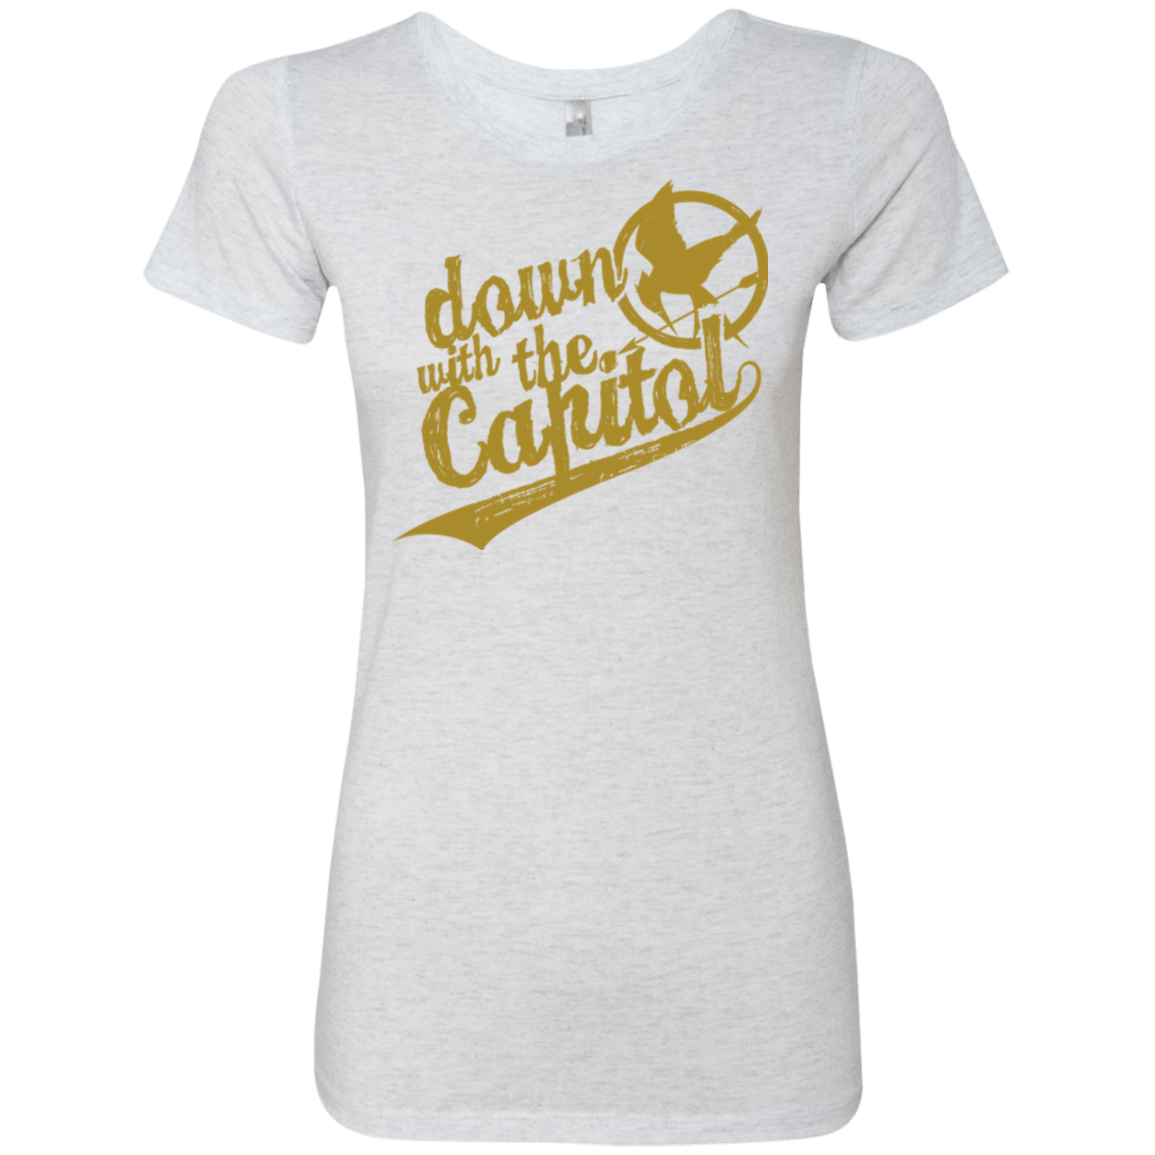 T-Shirts Heather White / Small Down with the Capitol Women's Triblend T-Shirt